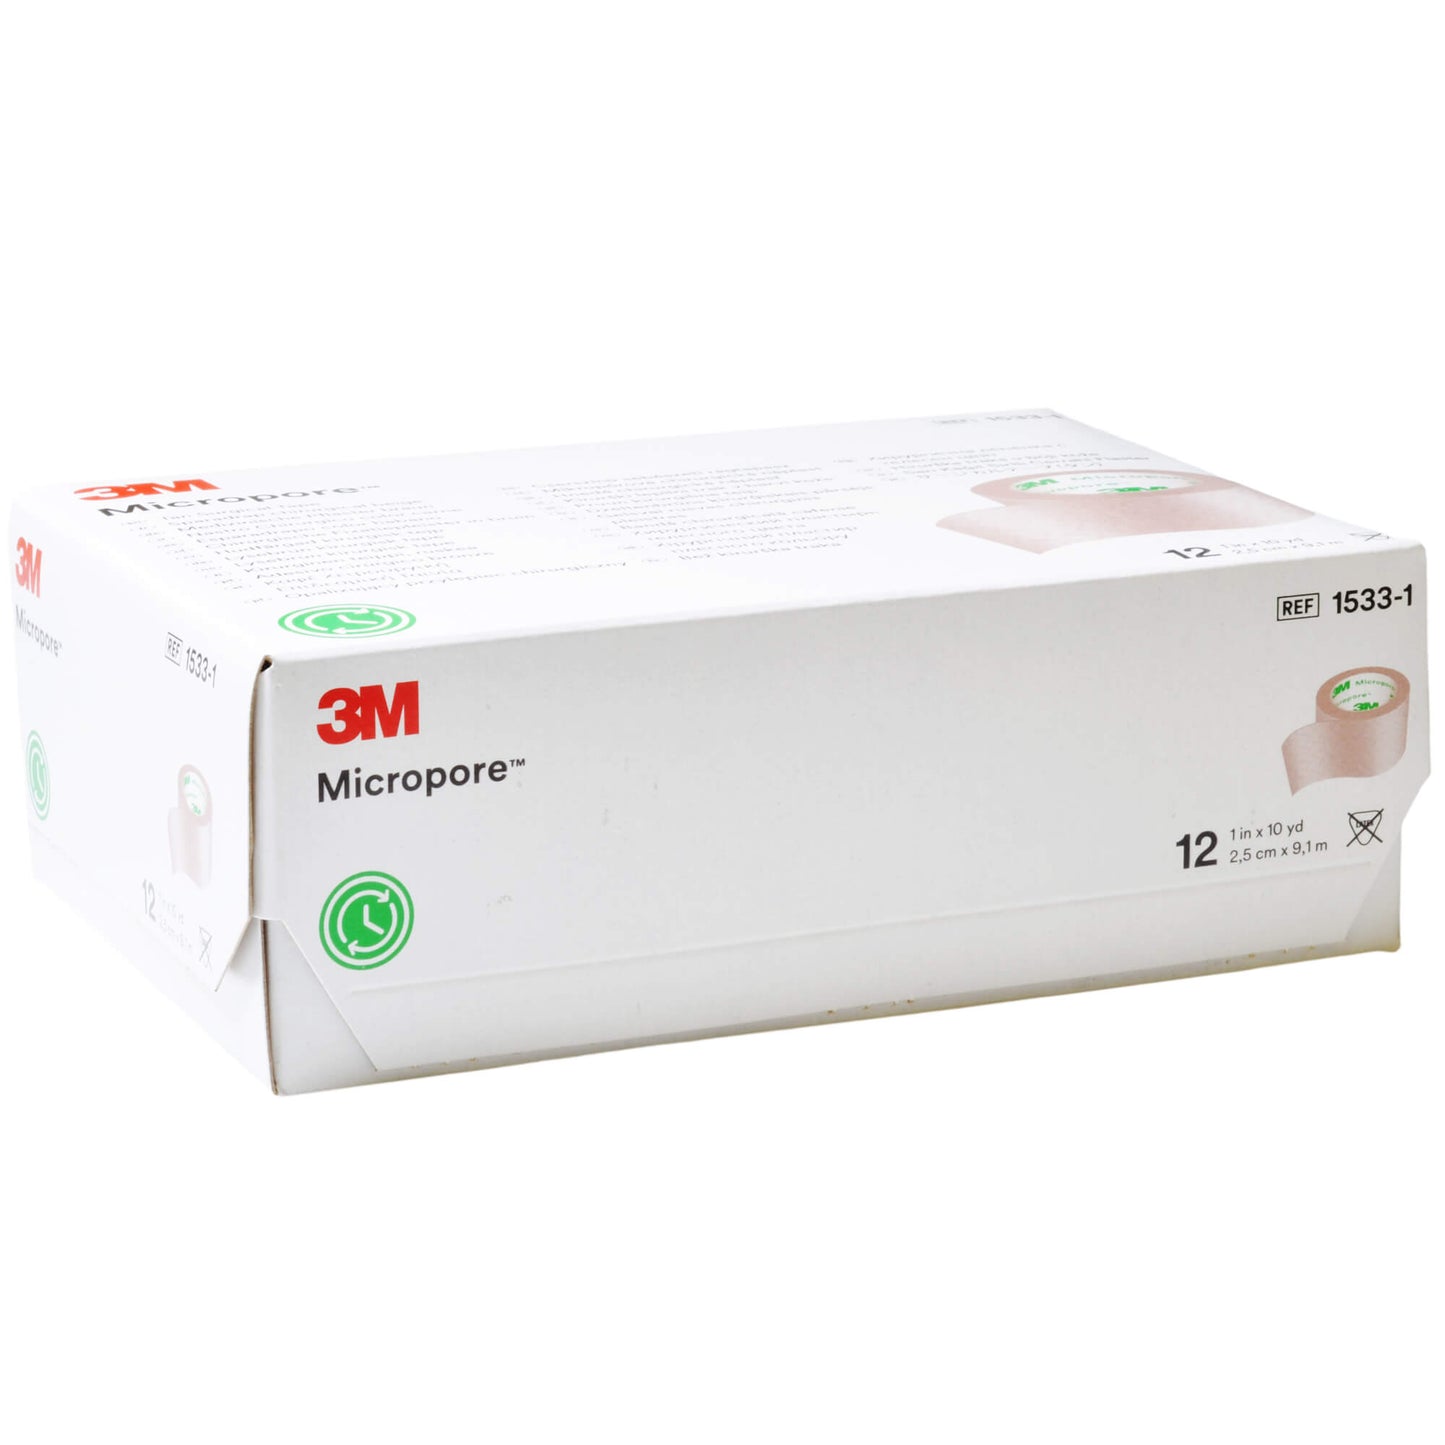 Micropore 3M Pflaster beige 2,5cm x 9,1m, 12 St. Packung